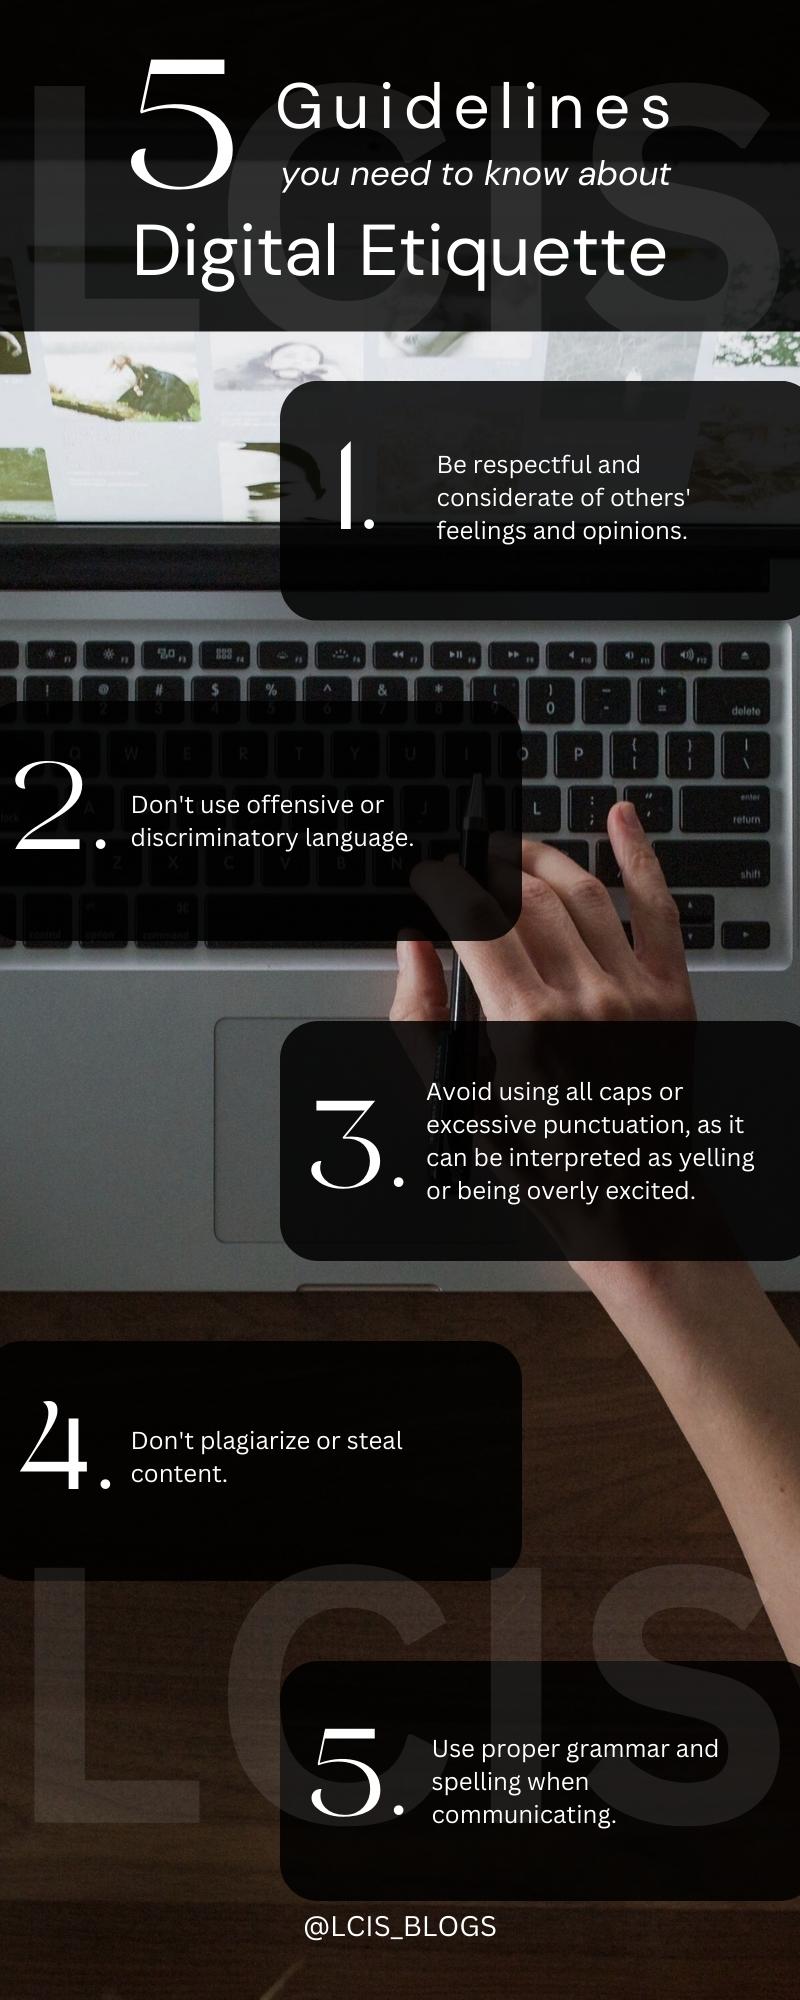 5 Guidelines you need to know about Digital Etiquette